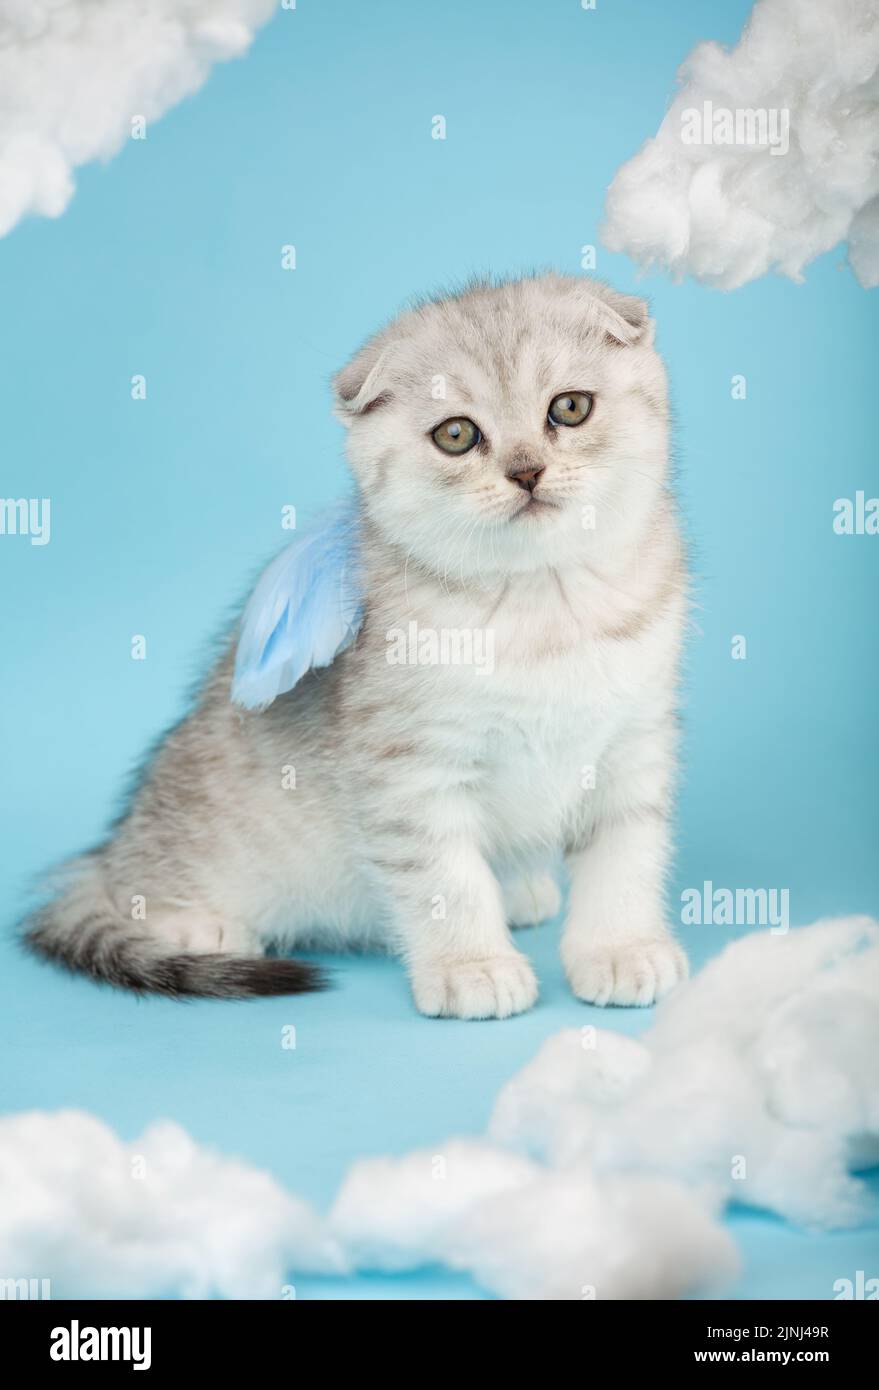 Portrait of a Scottish kitten with a funny facial expression wearing blue angel wings on his back. Cat with yellow eyes sits on a blue background betw Stock Photo